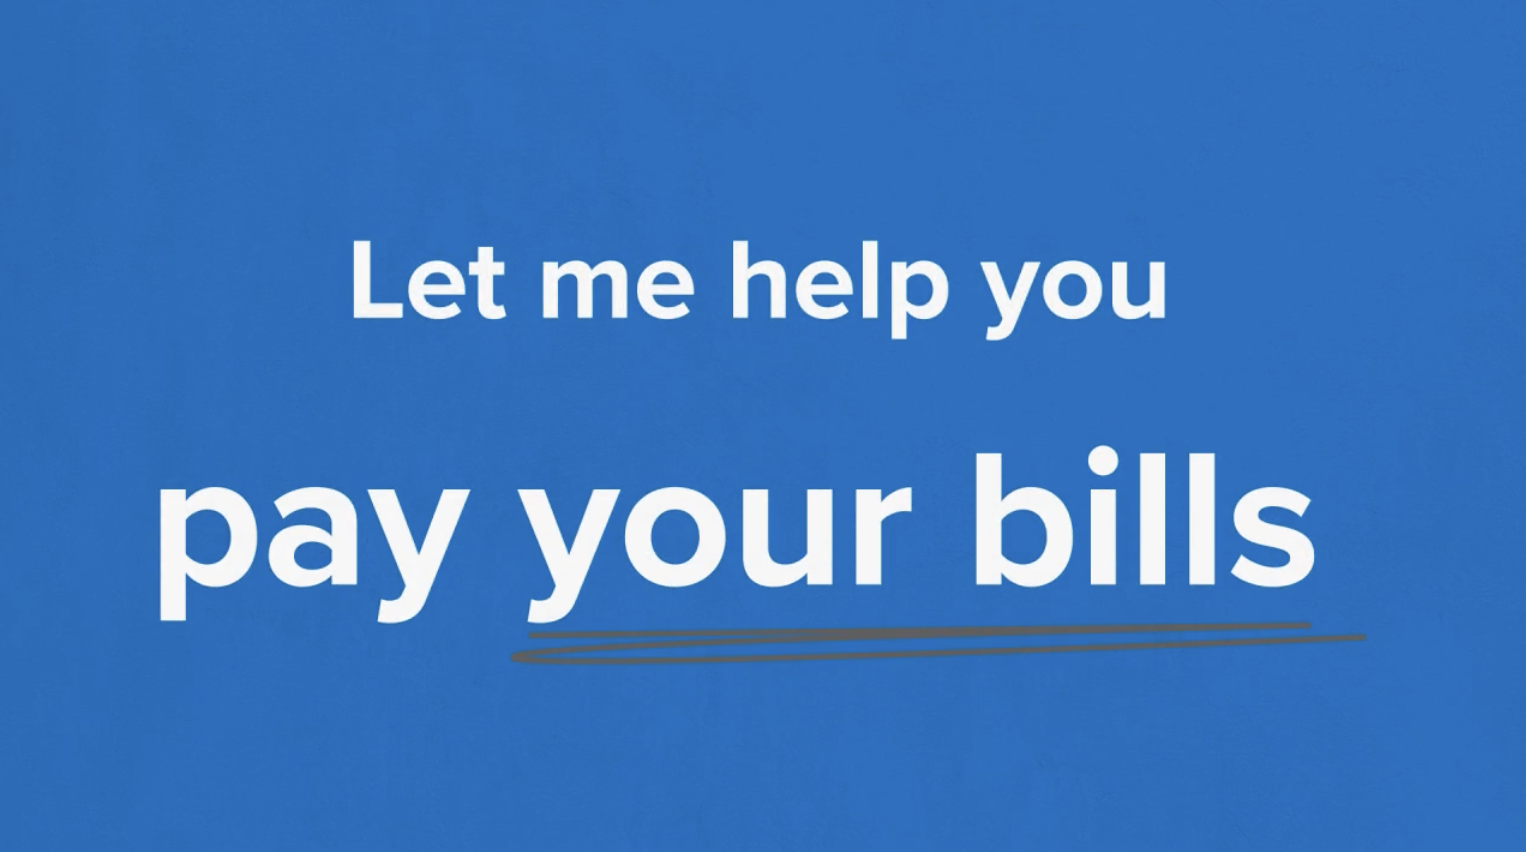 Let me help you pay your bills